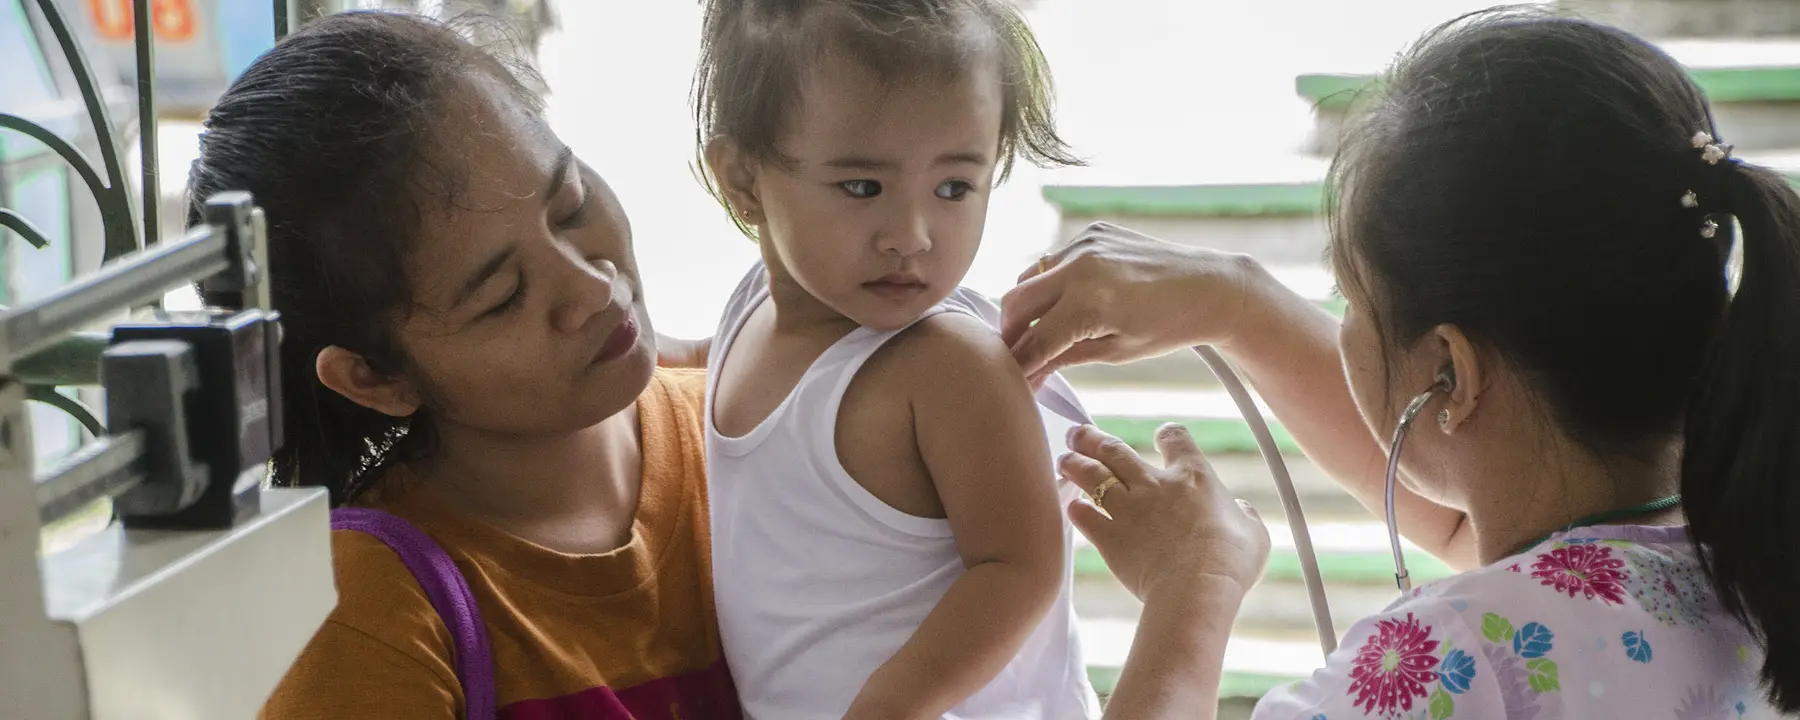 Filipino doctor measures a young patient